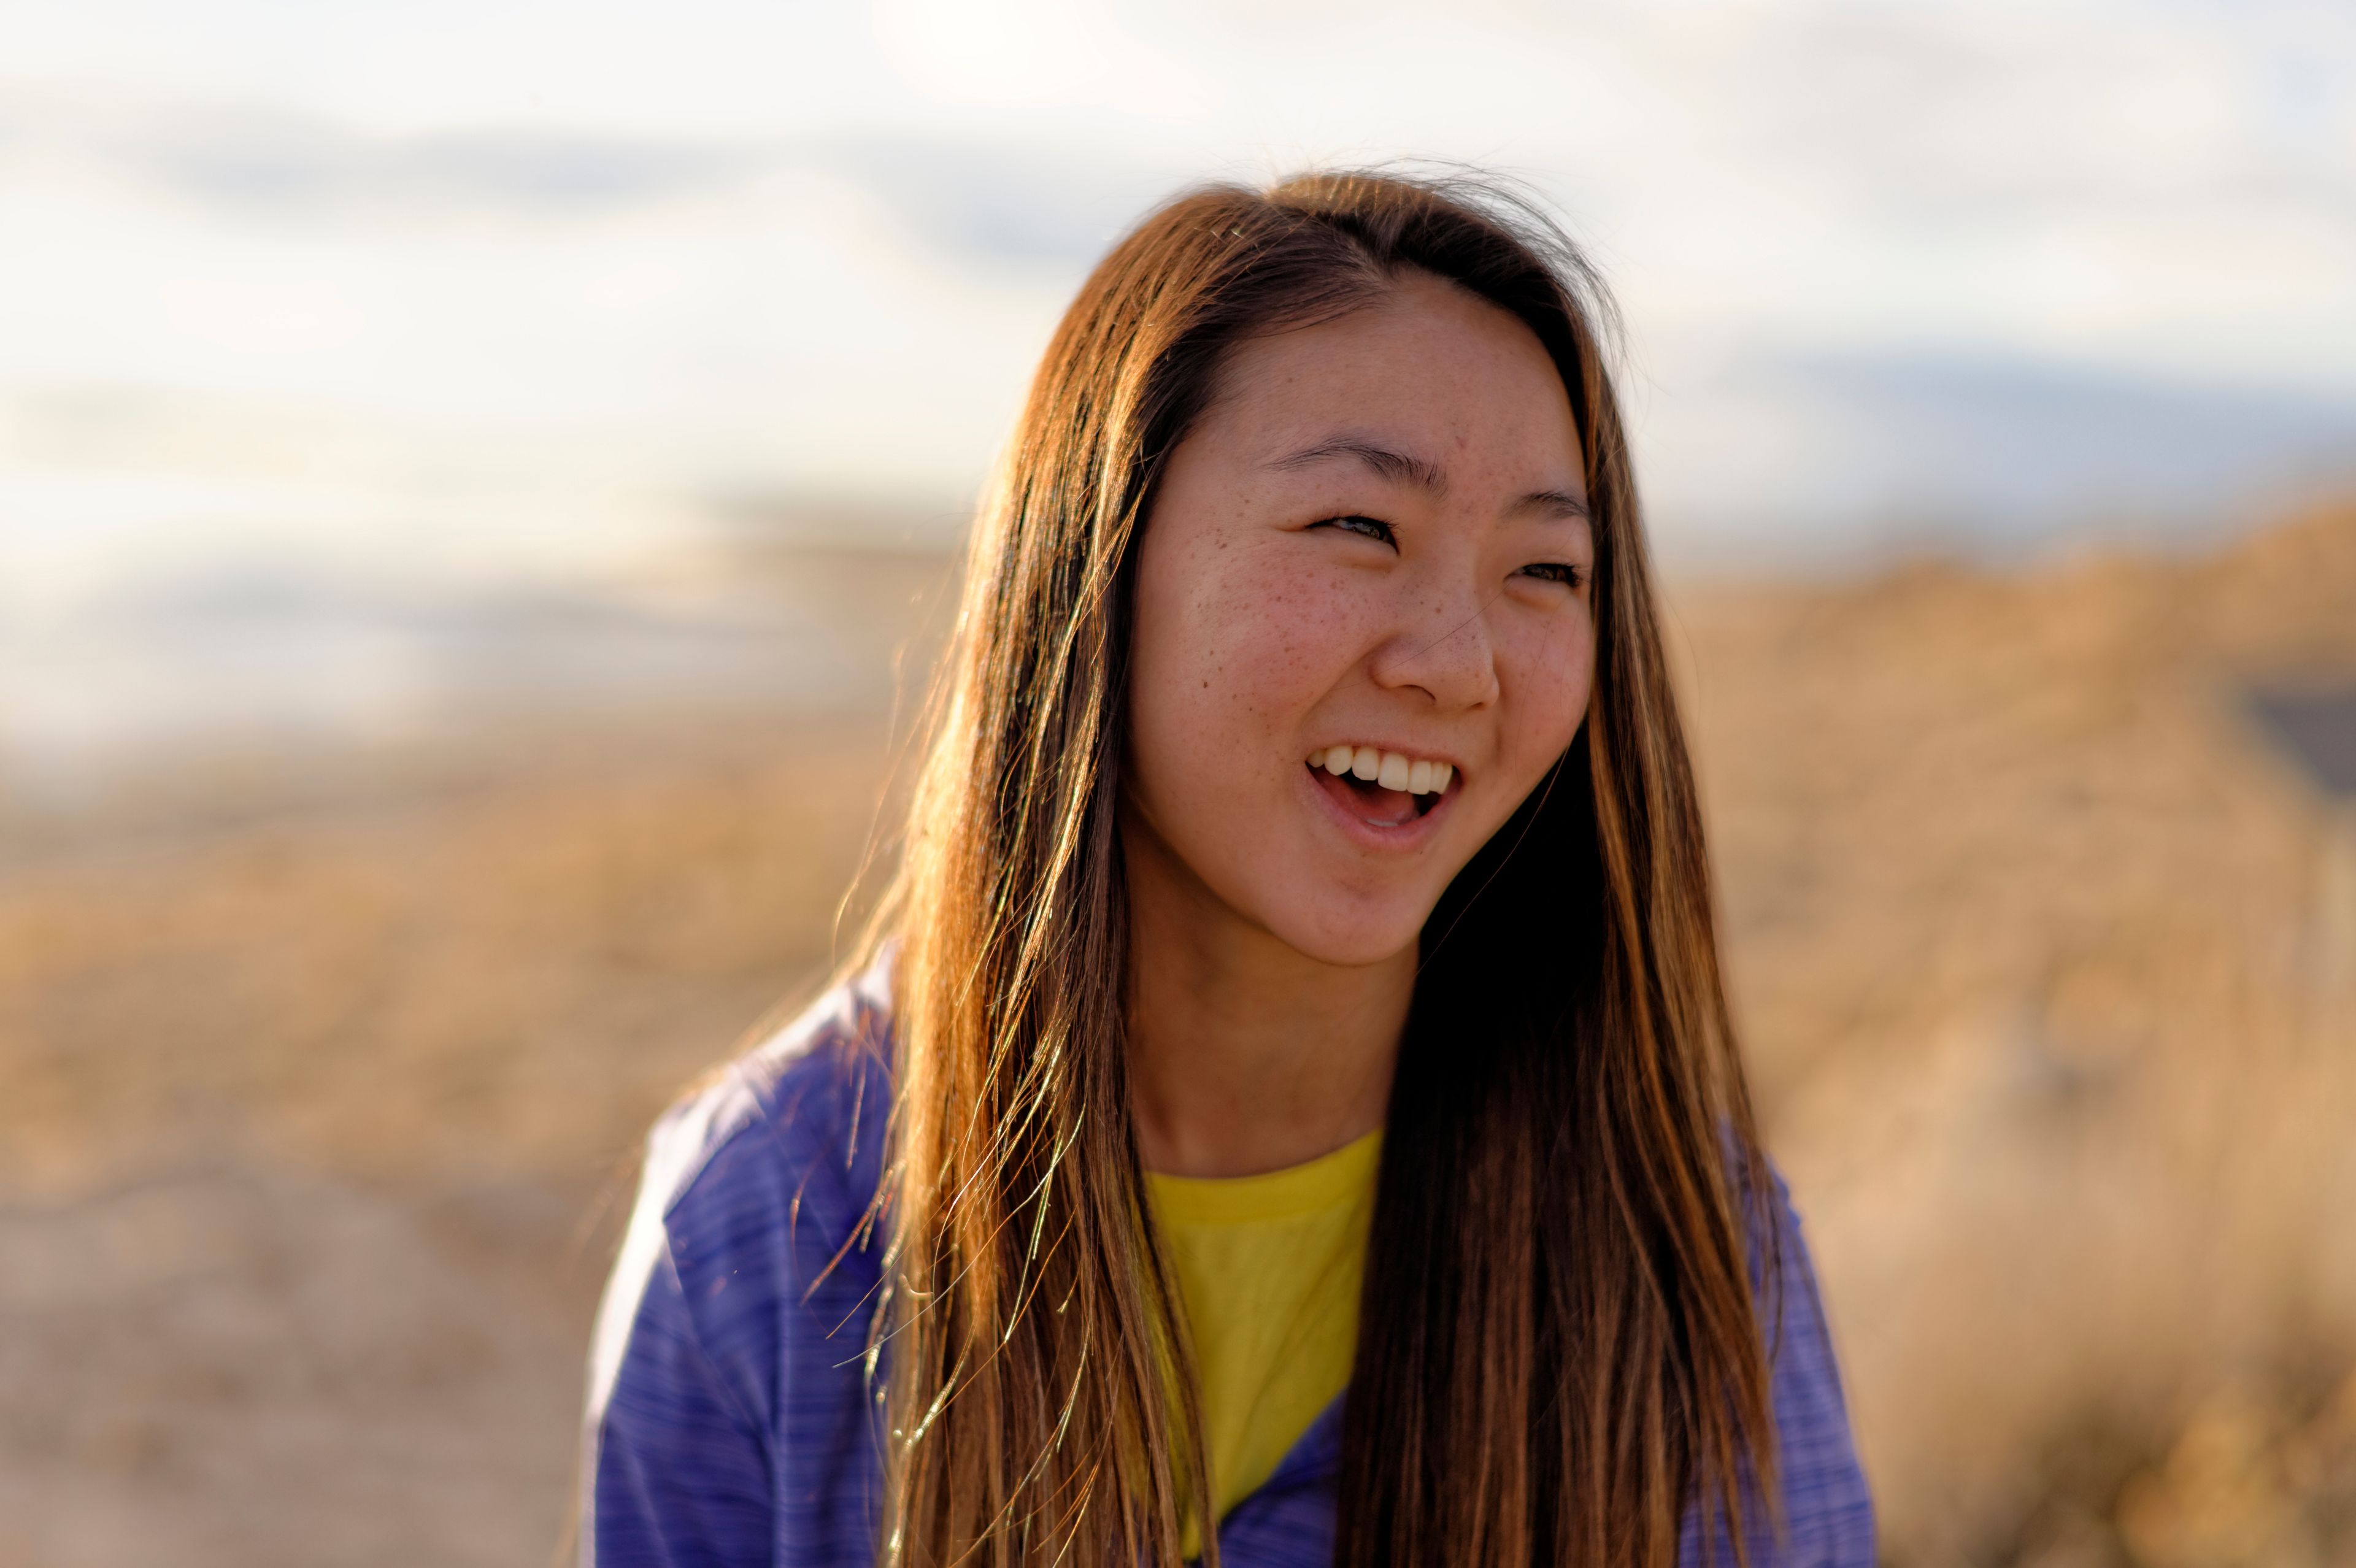 A portrait of a young woman outdoors, looking to the side and laughing.